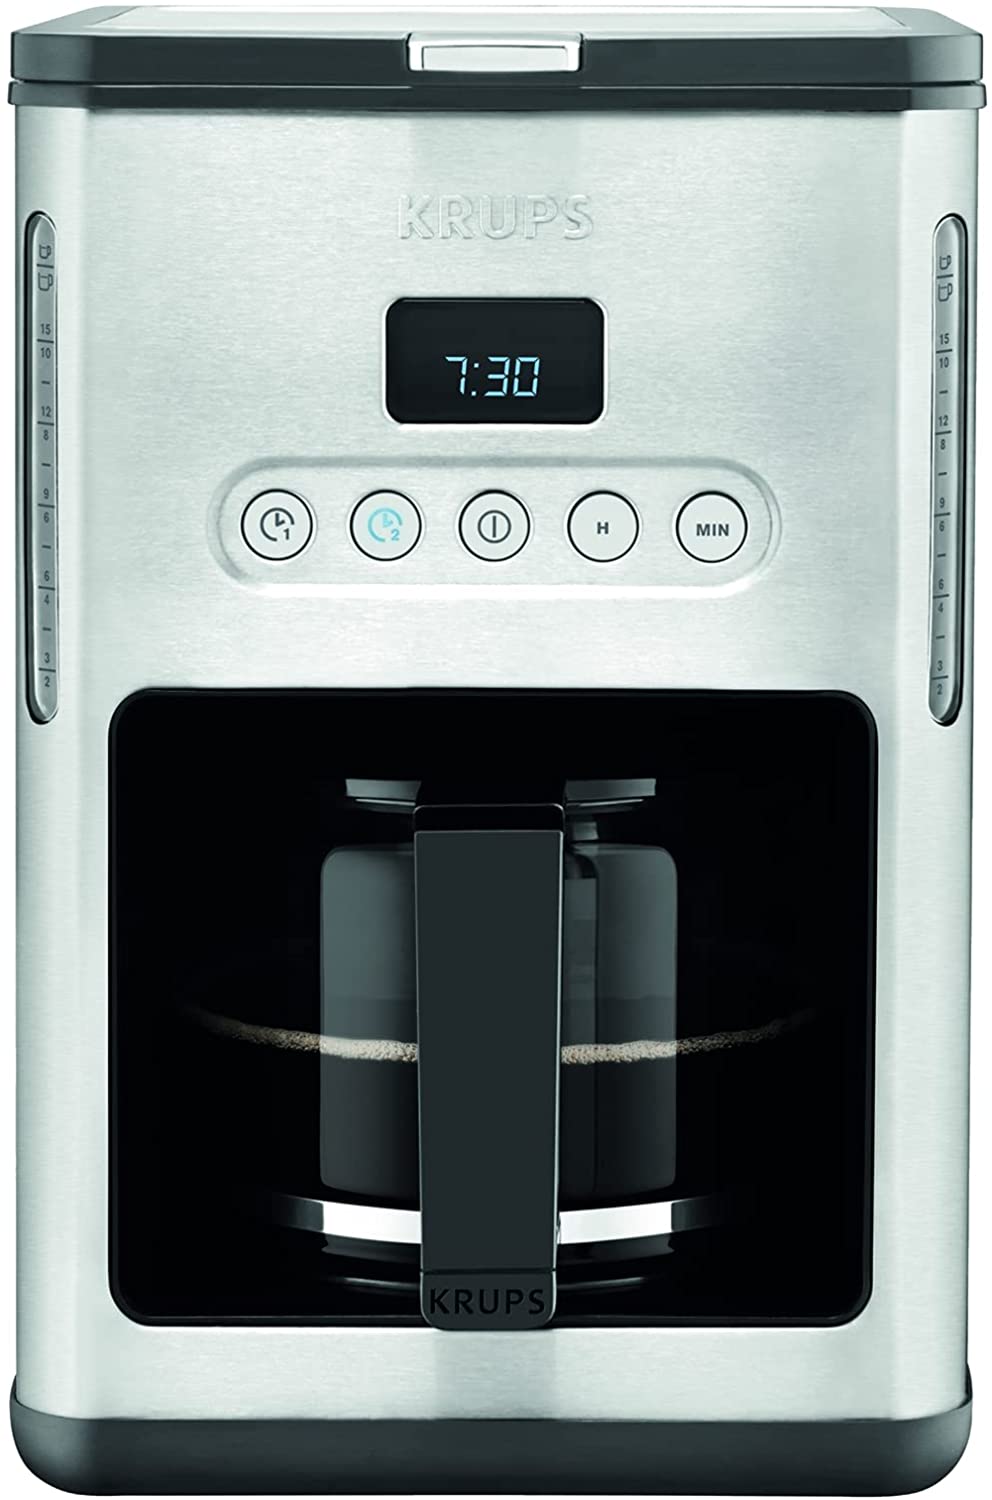 Krups KM442D Premium Filter Coffee Machine 10-15 Cups 1,000 W Programmable Stainless Steel / Black